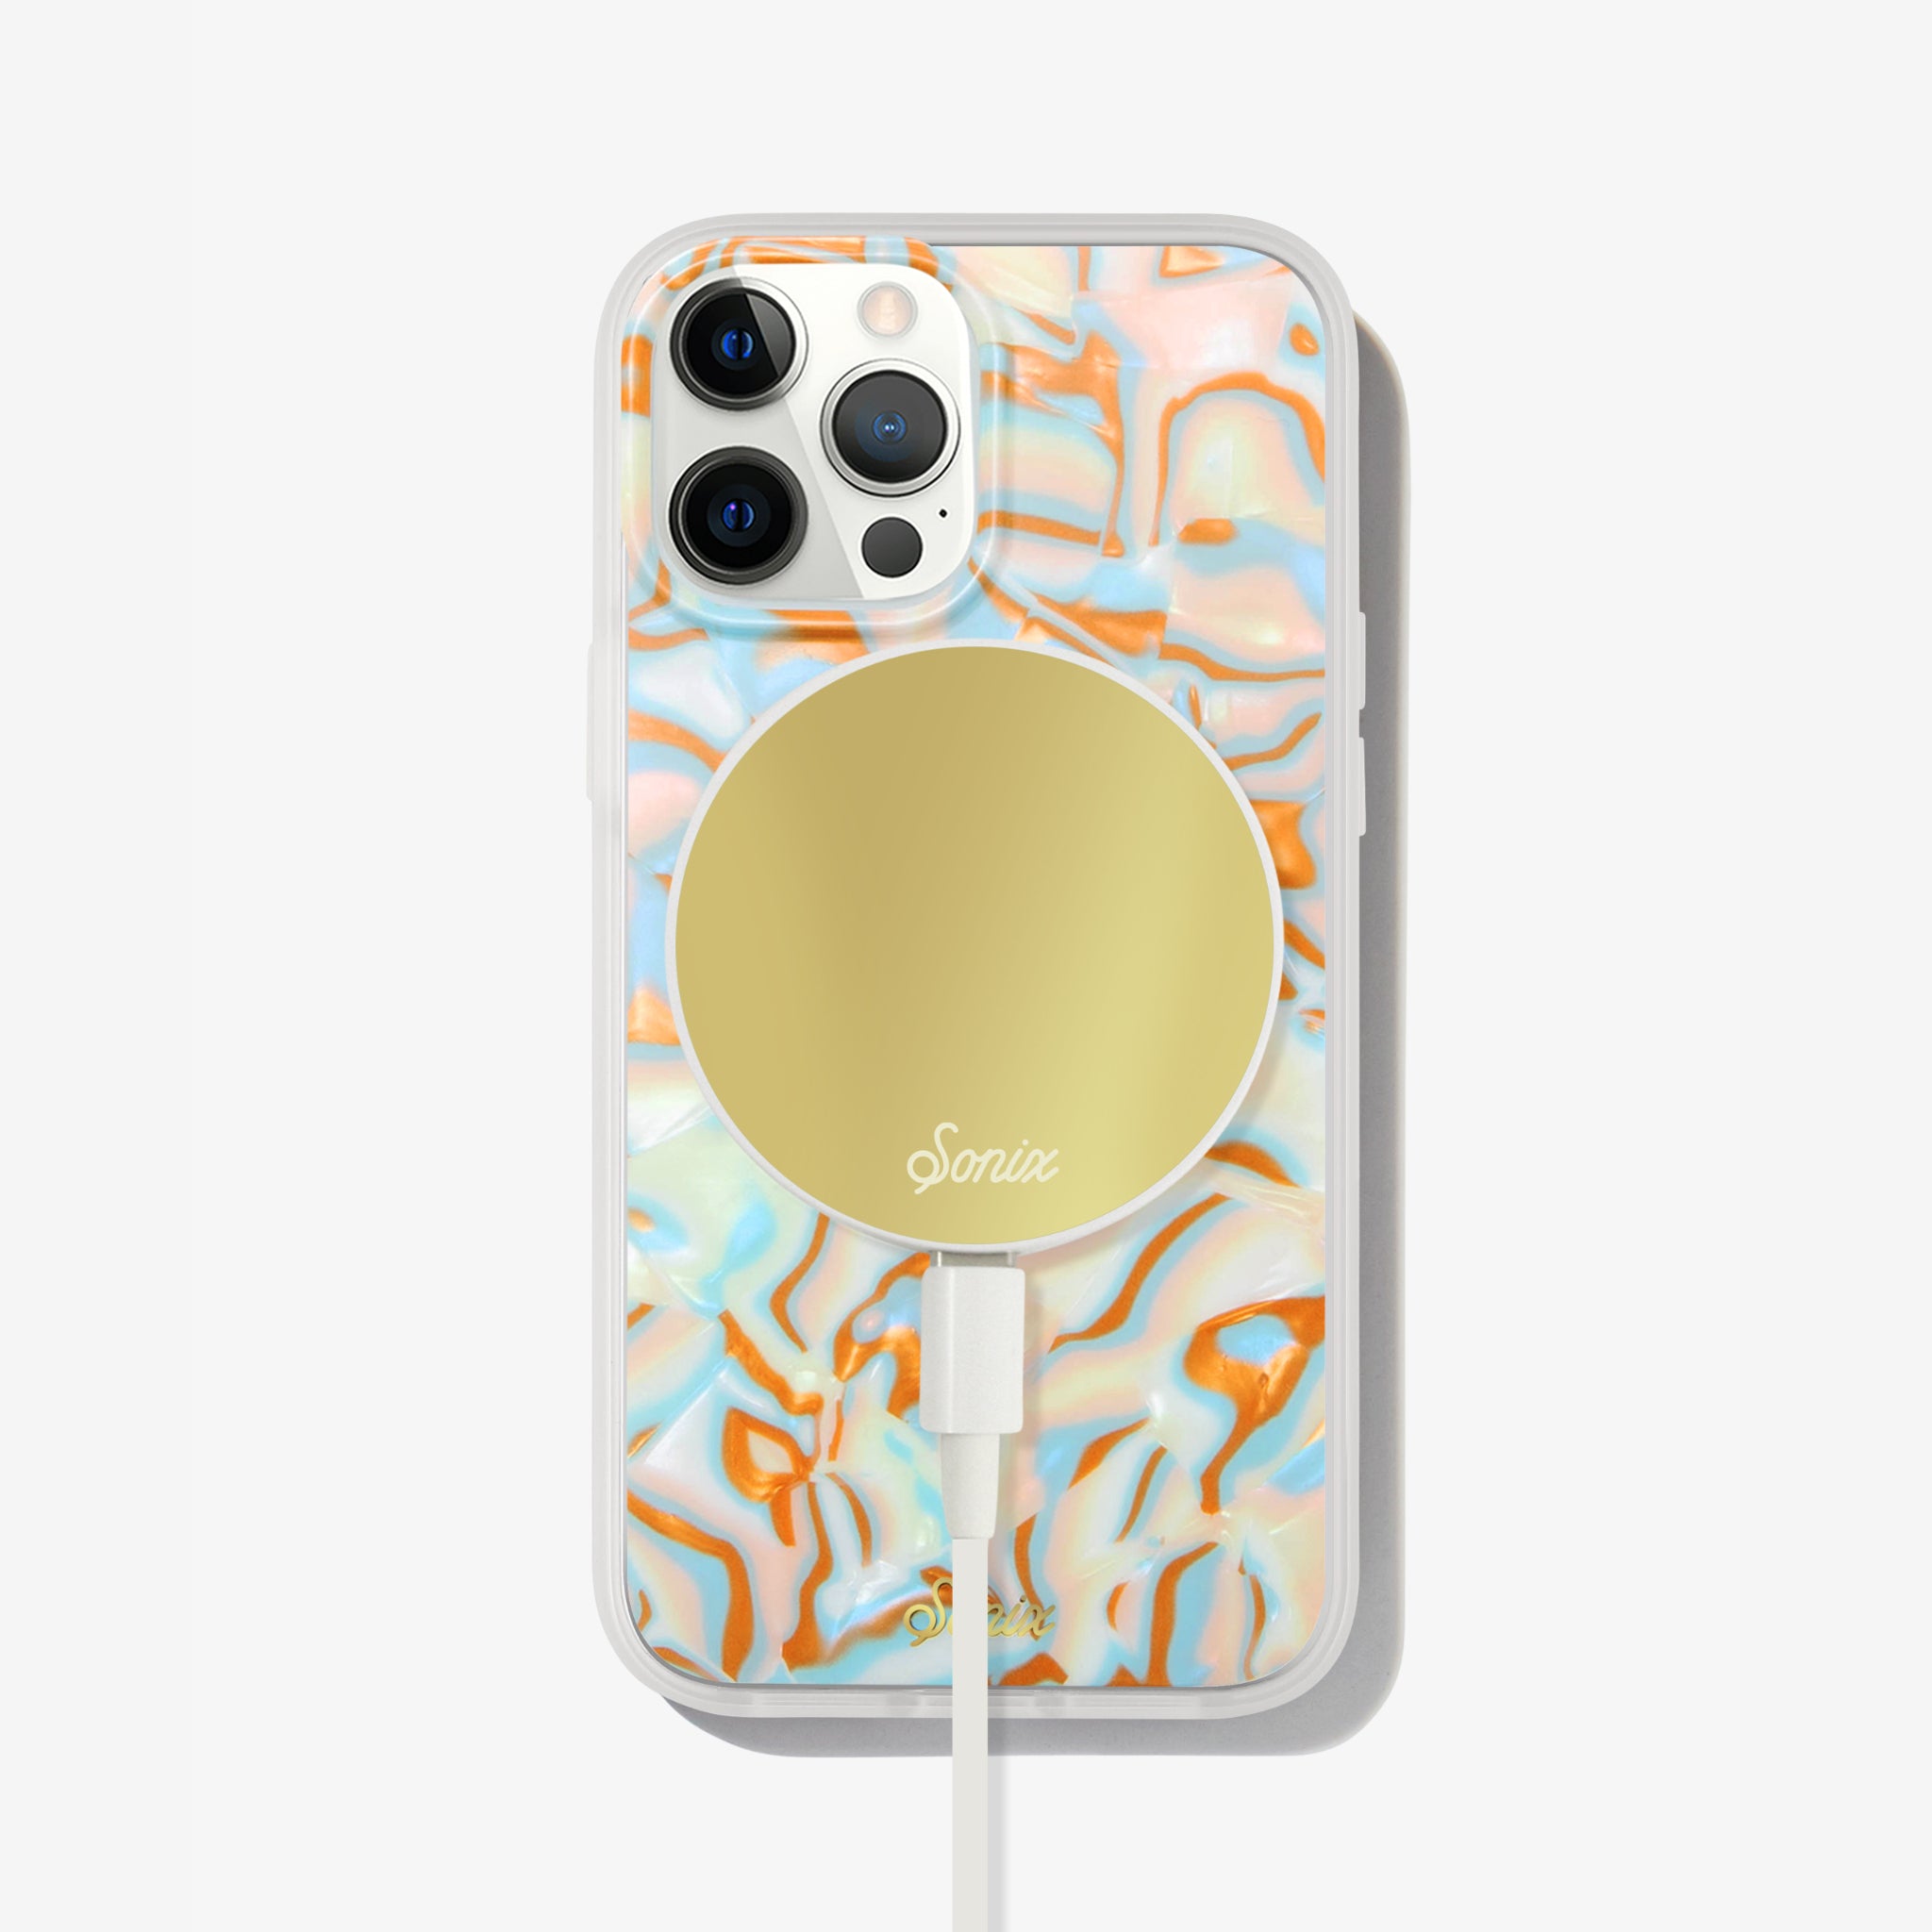 metallic oranges, blues, and cream colors in a wavy 70's pattern shown on an iphone 13 with a gold maglink charger on the back